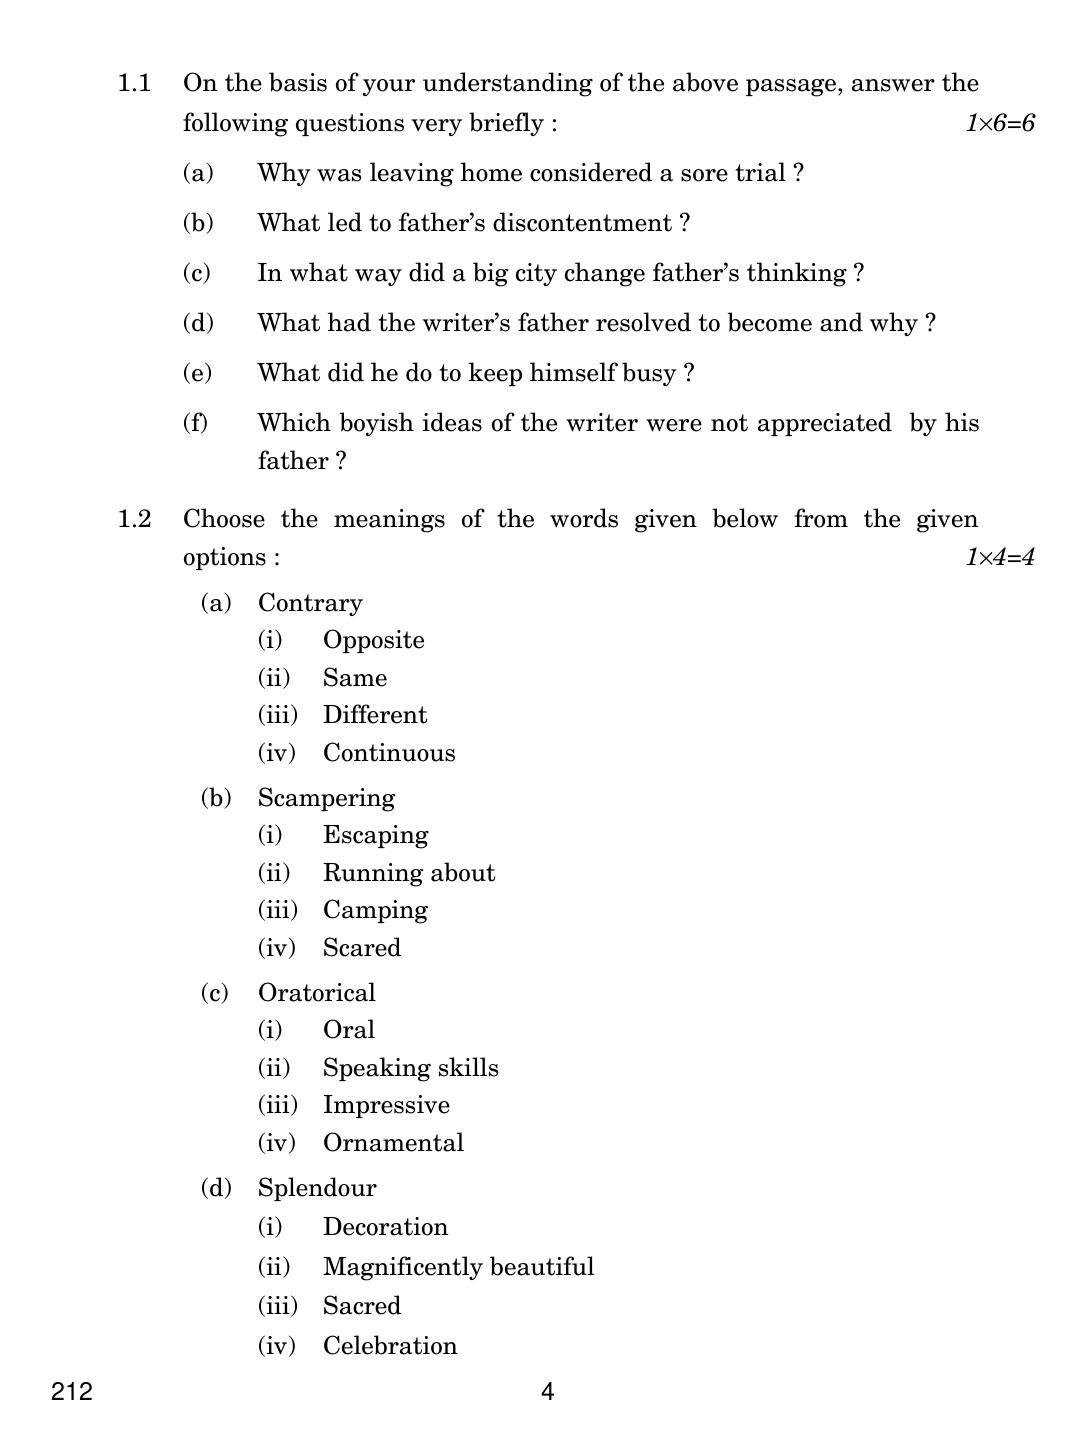 CBSE Class 12 212 ENGLISH ELECTIVE - C 2019 Compartment Question Paper - Page 4